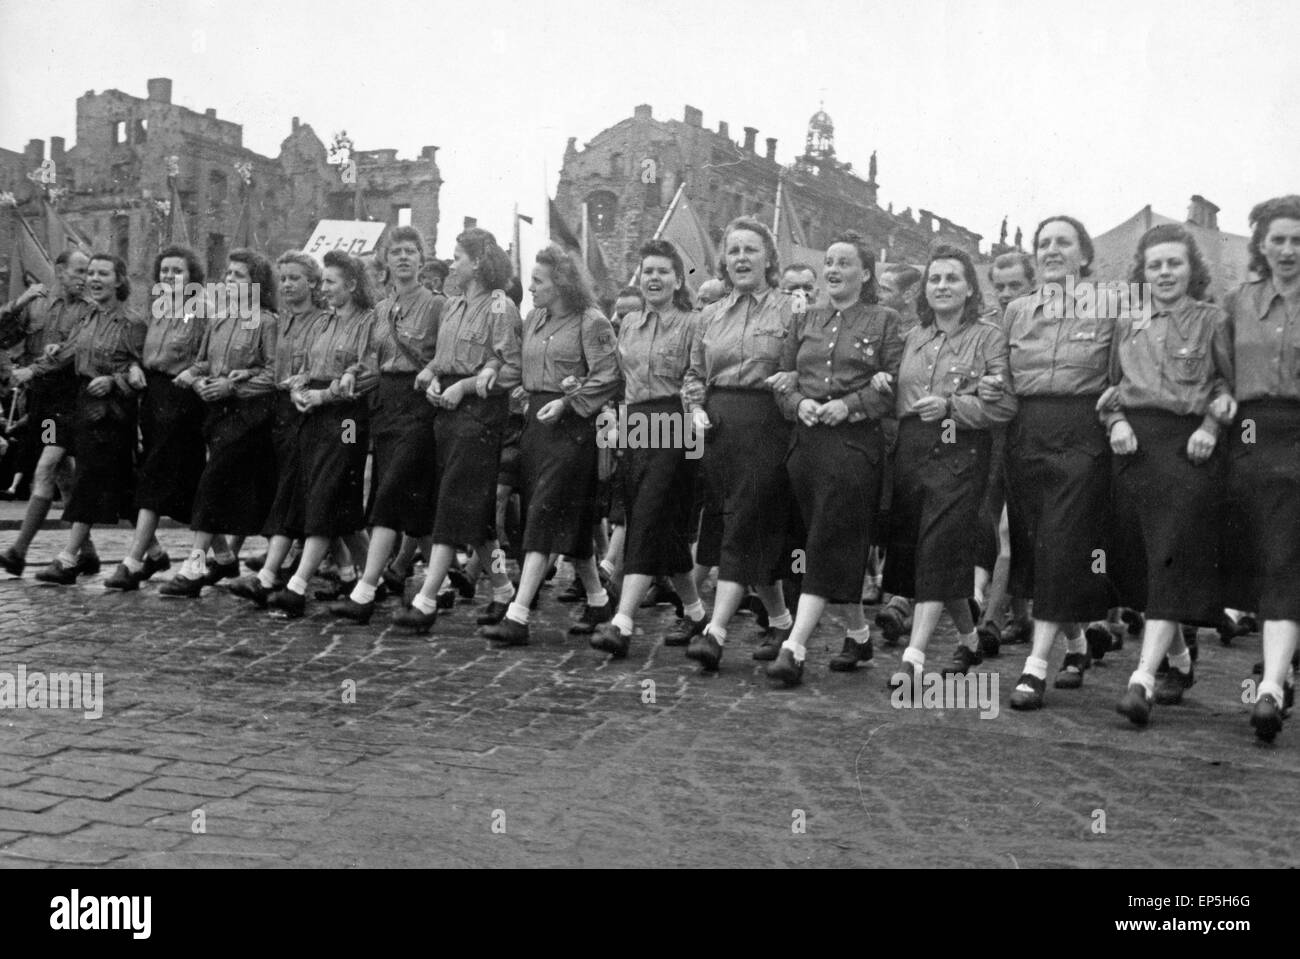 Maikundgebung mit Parade der FDJ in Ost Berlin, DDR 1950er Jahre. 1st of May rally with parade of FDJ youth organization at East Stock Photo